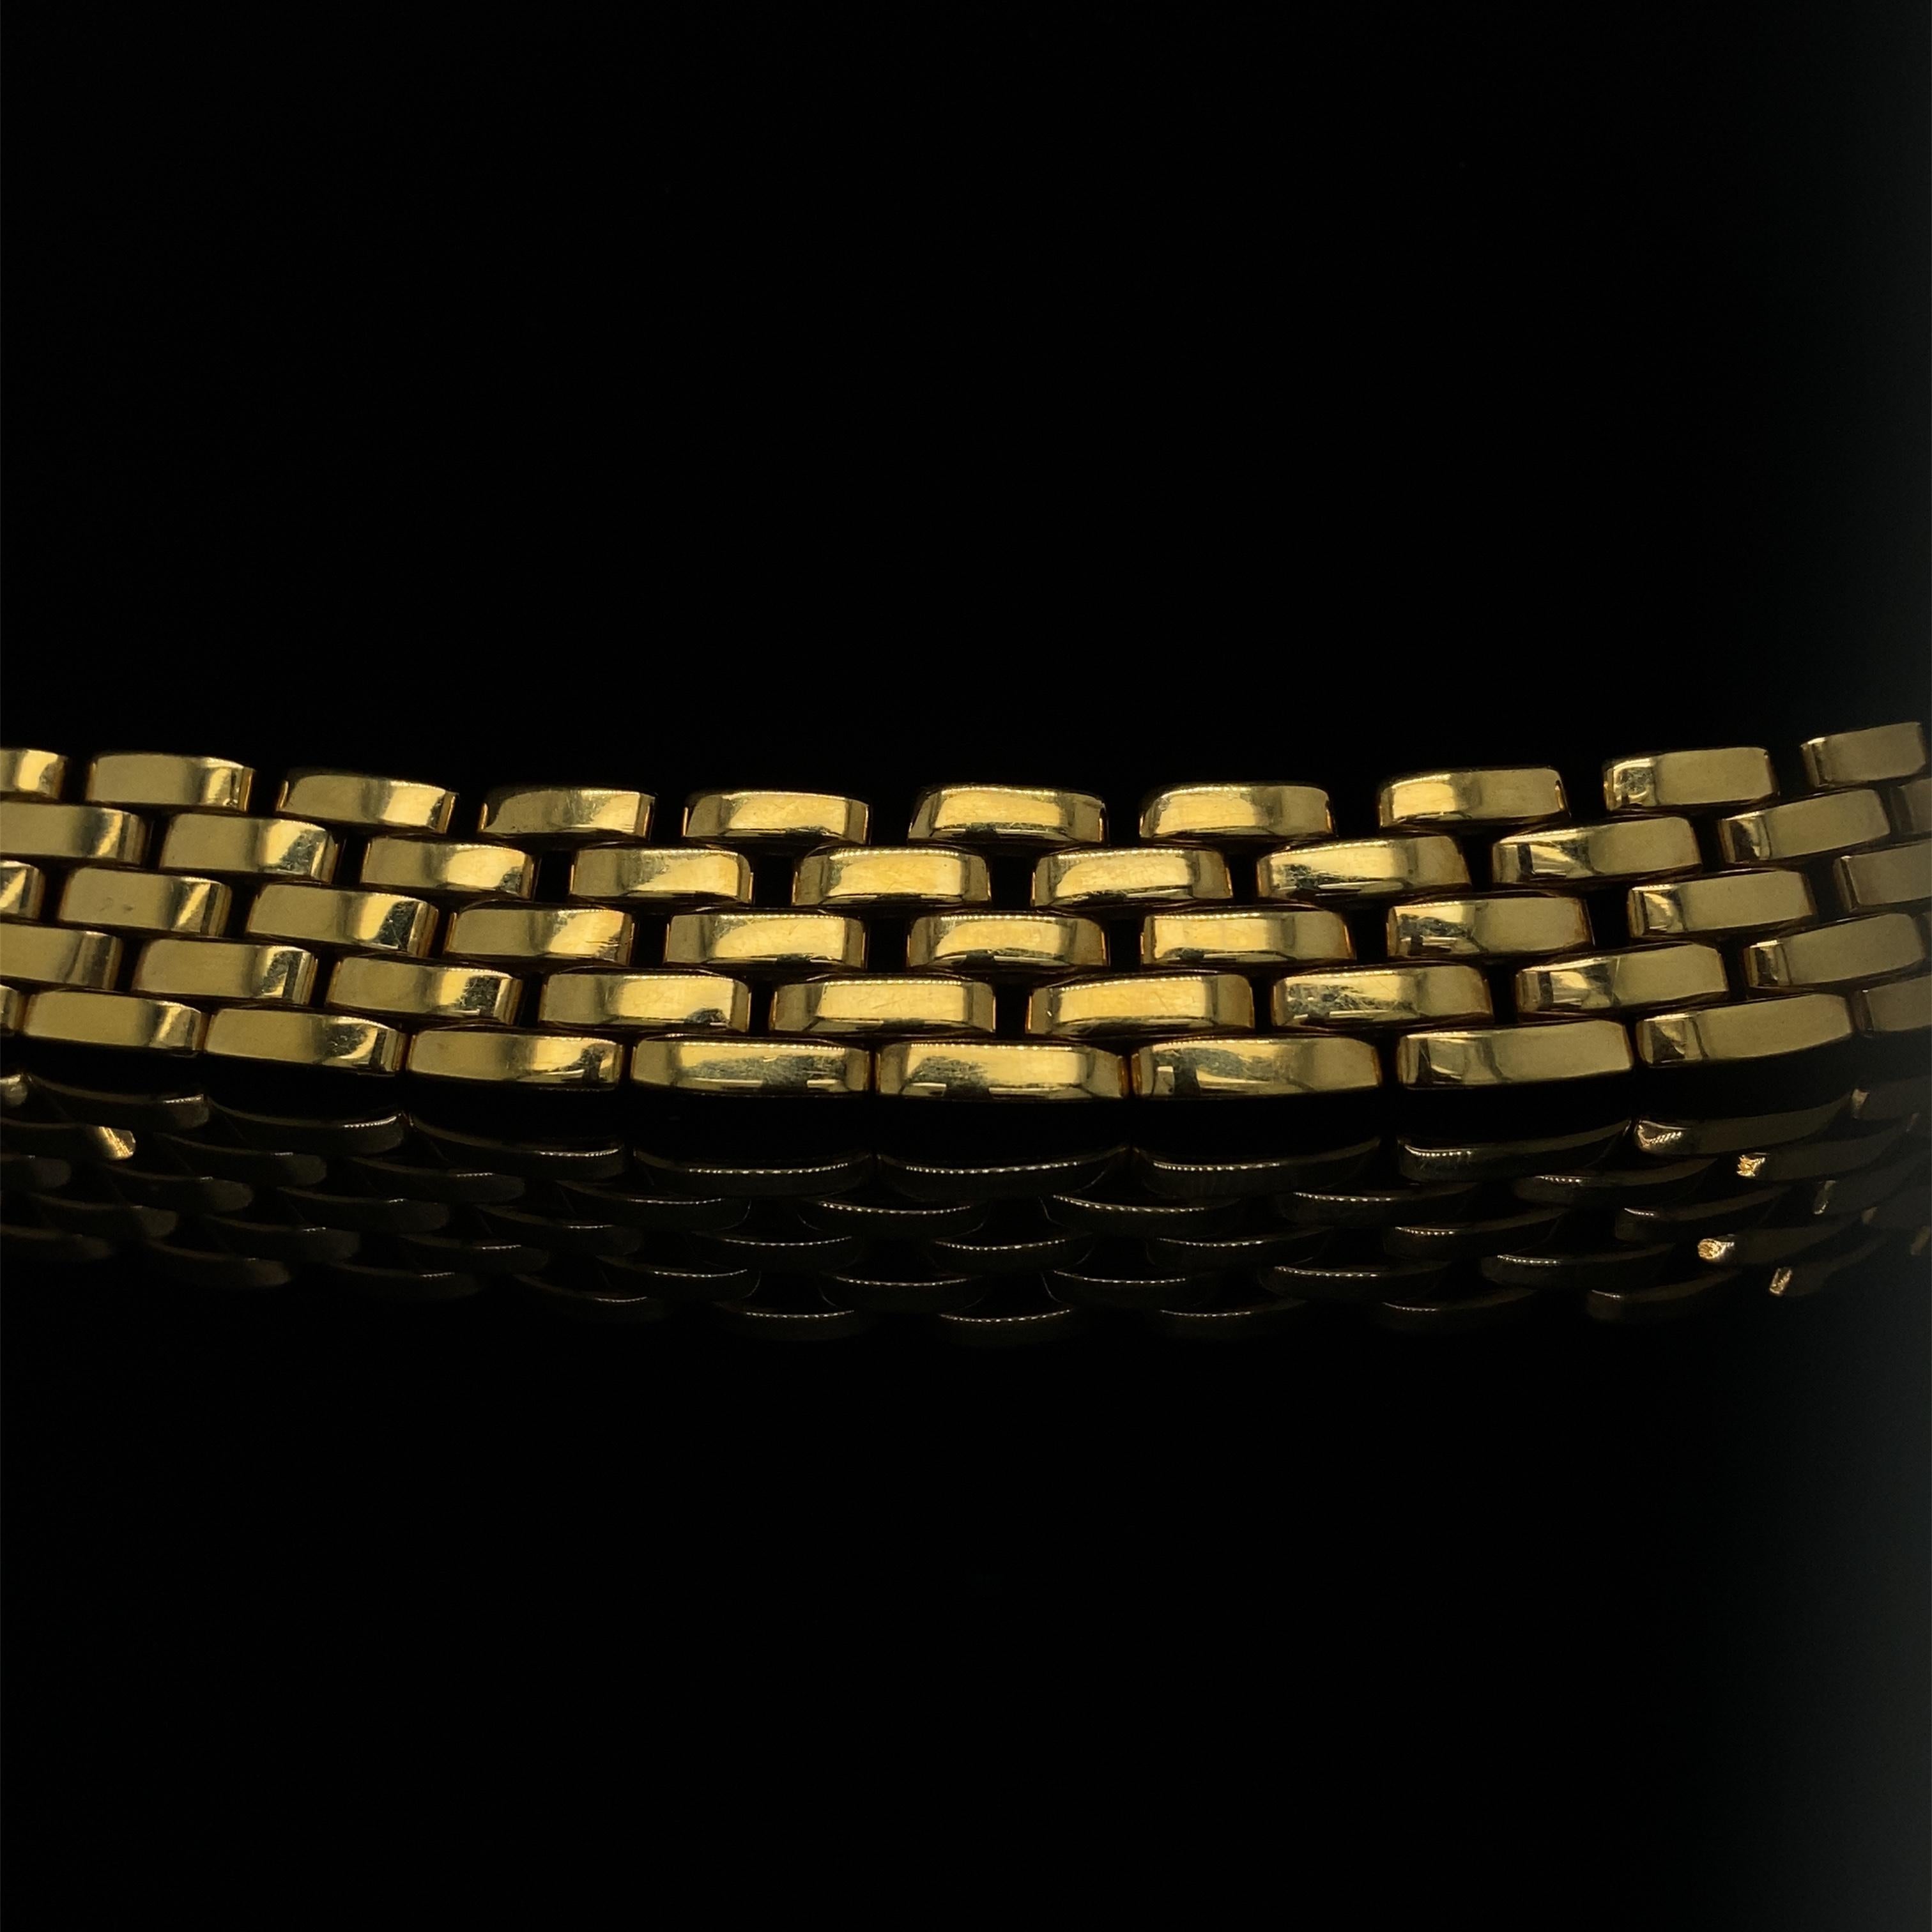 Cartier Maillon Panthere five-row yellow gold necklace.

The necklace comprises of Cartier's classic flat solid brick style links in 18 karat yellow gold.

The Maillon Panthère brick link design is an iconic piece due to its recognizable design and